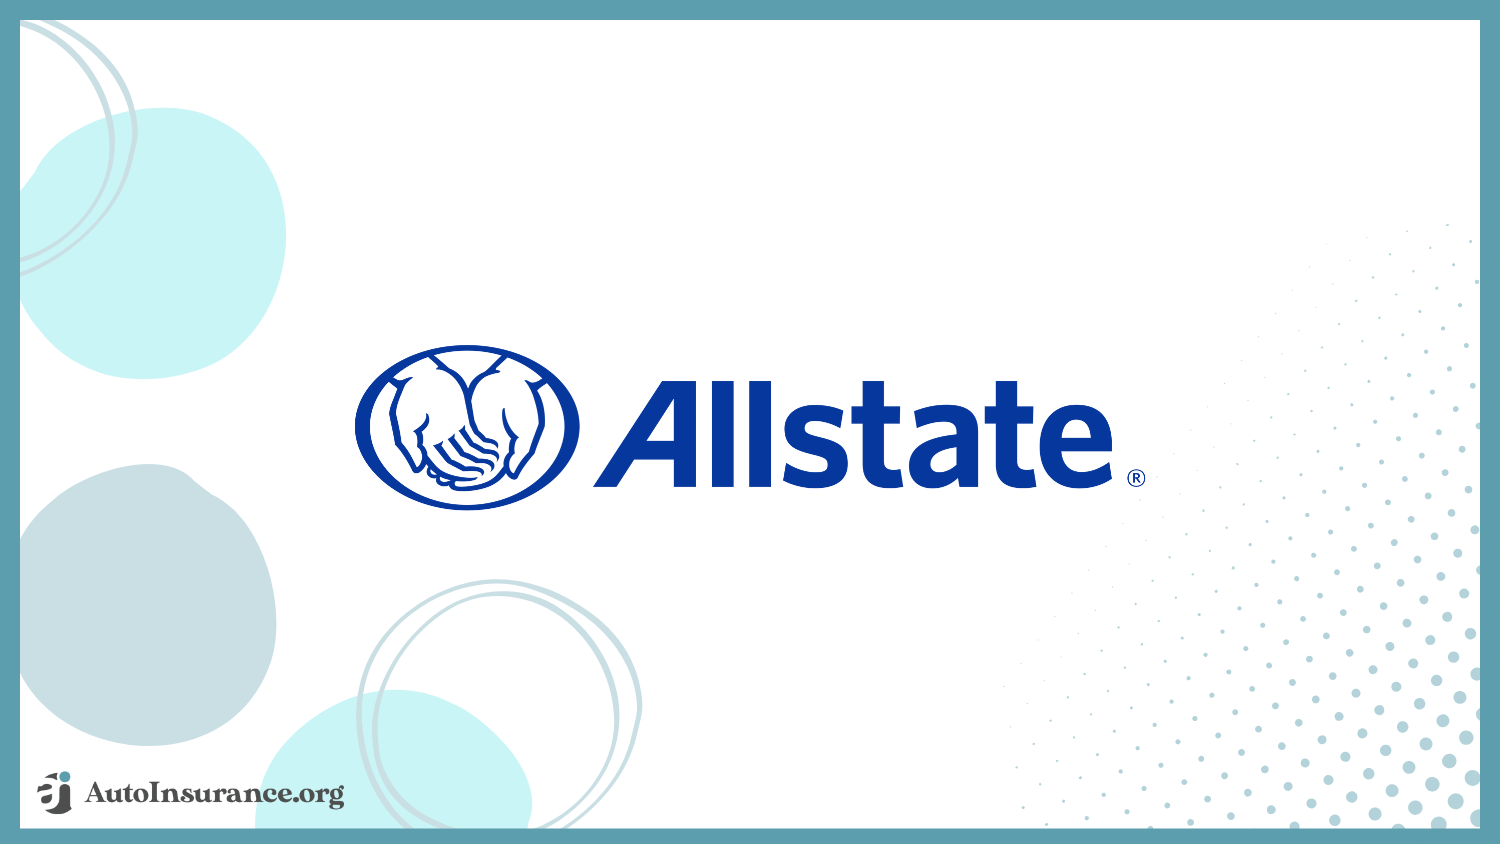 Allstate: Best Auto Insurance for Drivers With Multiple Sclerosis